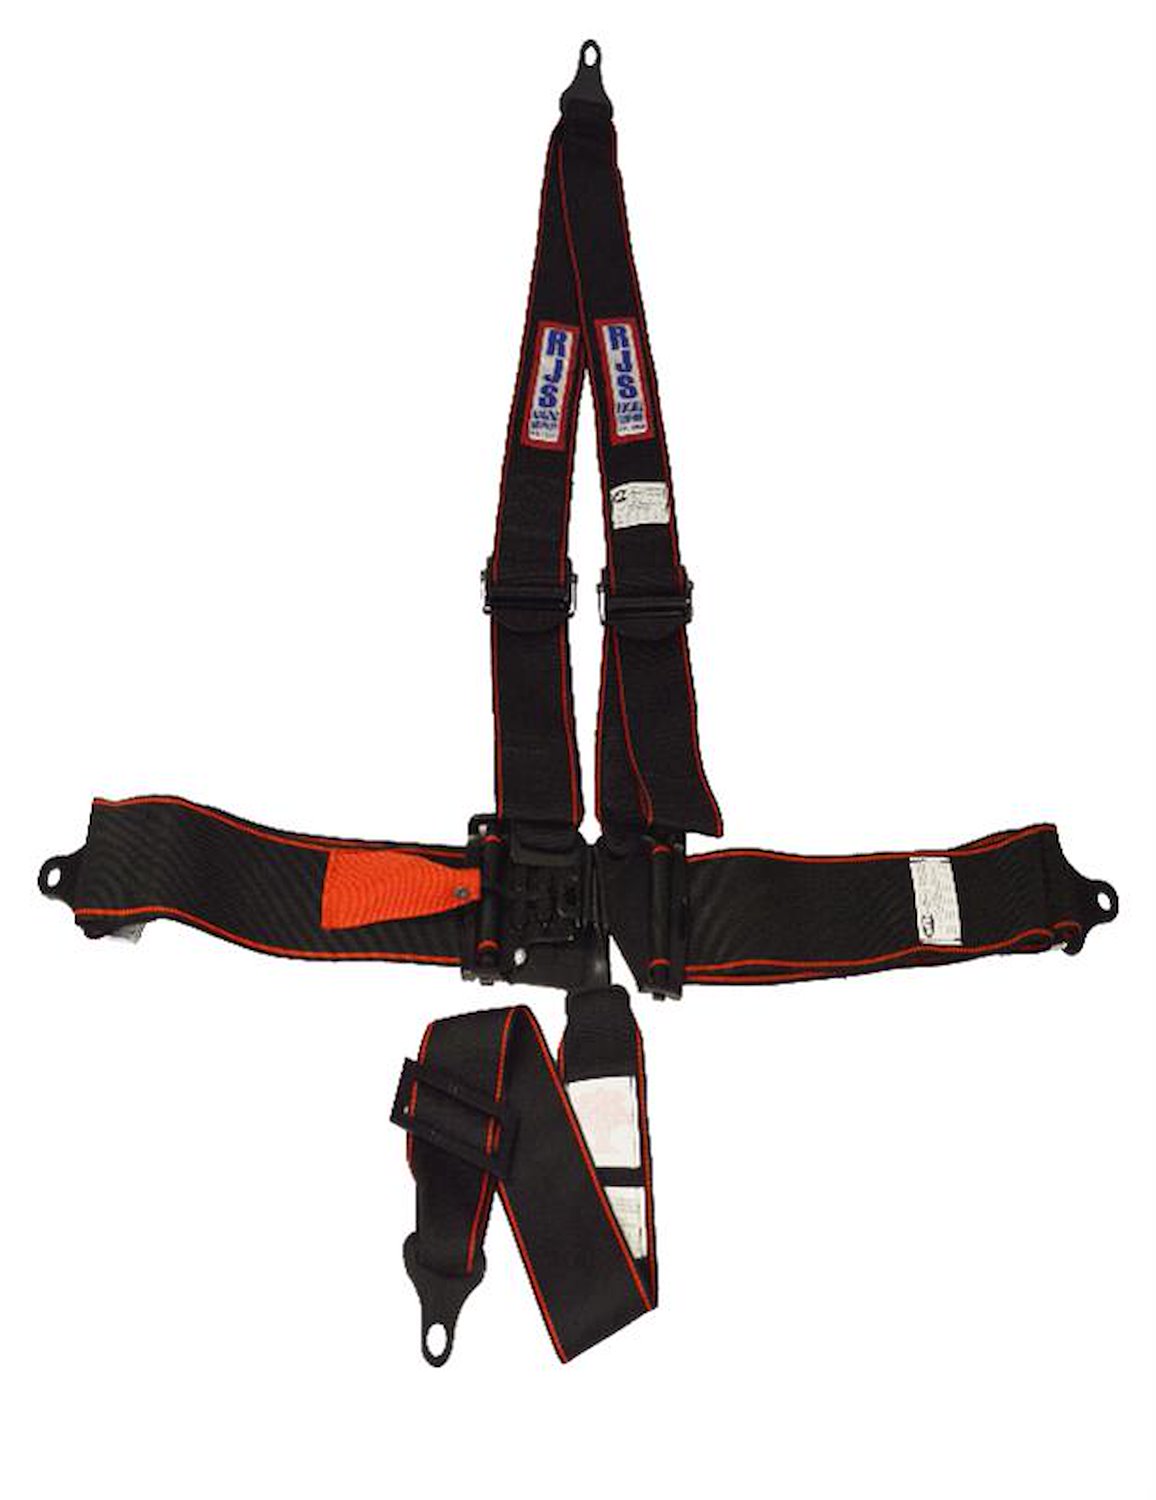 SFI 16.1 ELITE L&L HARNESS 3 PULL UP Lap Belt 3 Shoulder Harness Individual FLOOR Mount 3 DOUBLE Sub ALL WRAP ENDS BLACK/RED